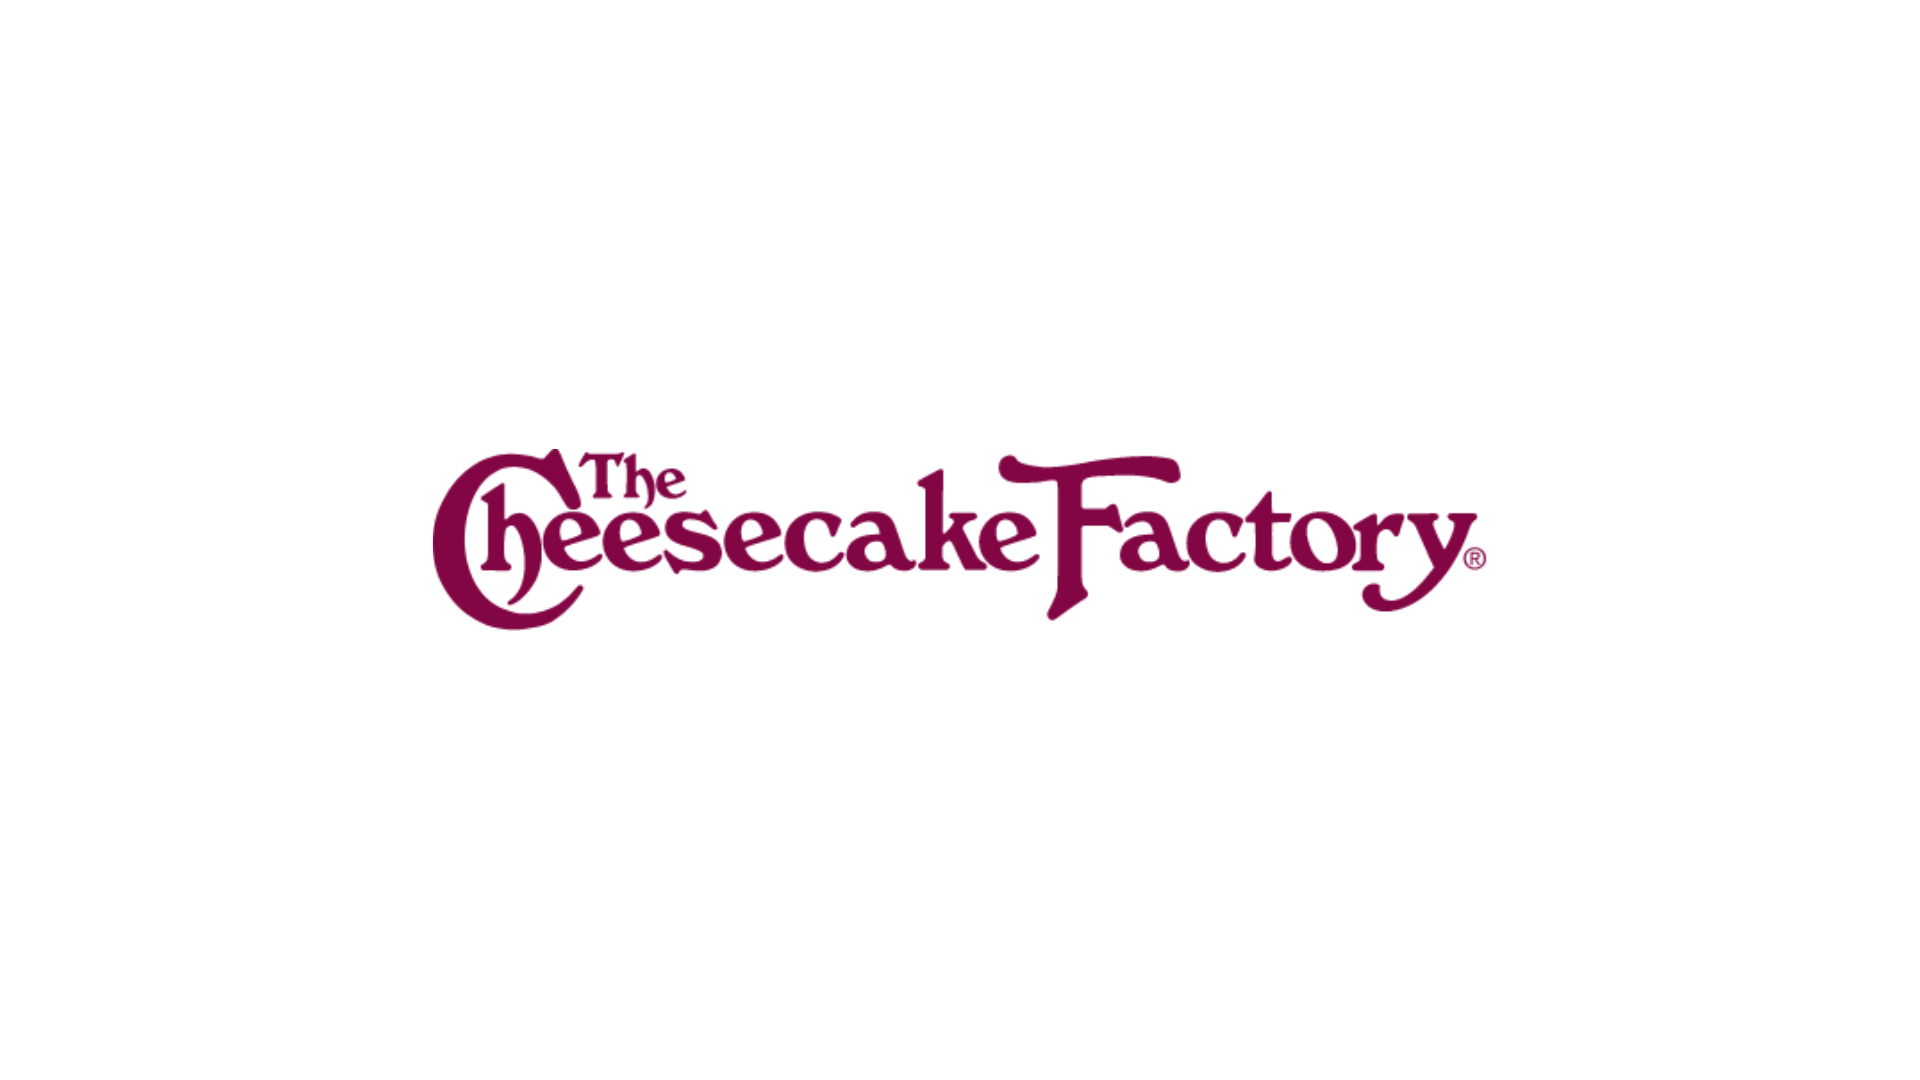 The Cheesecake Factory logo in red